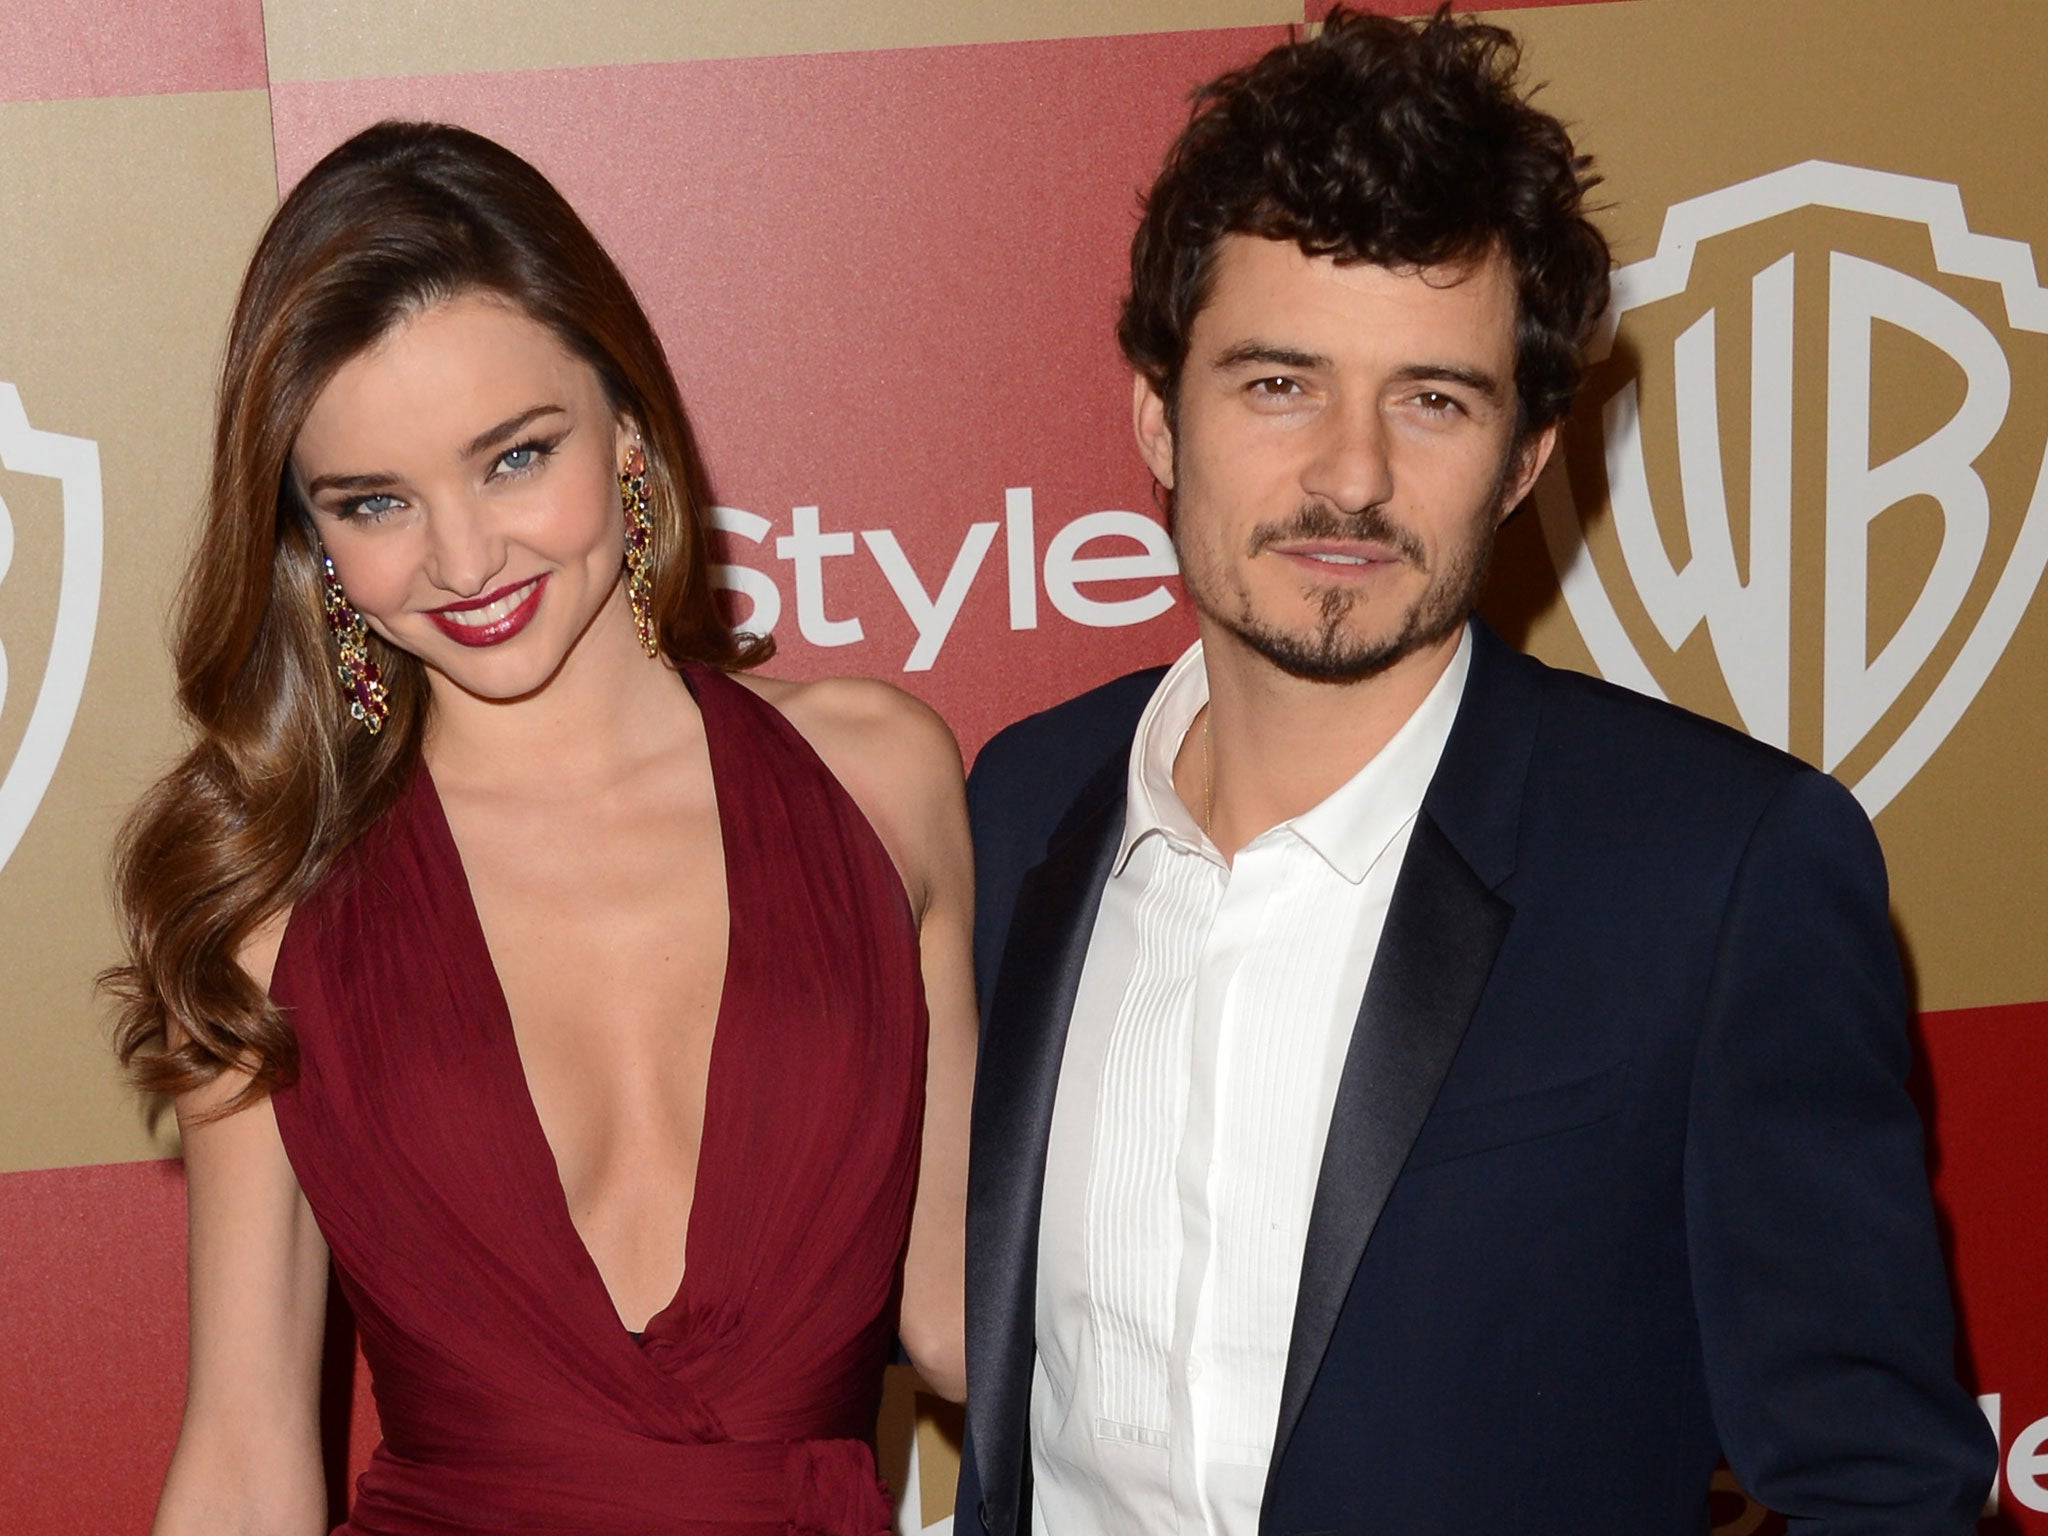 Miranda Kerr and Orlando Bloom have split after three years of marriage